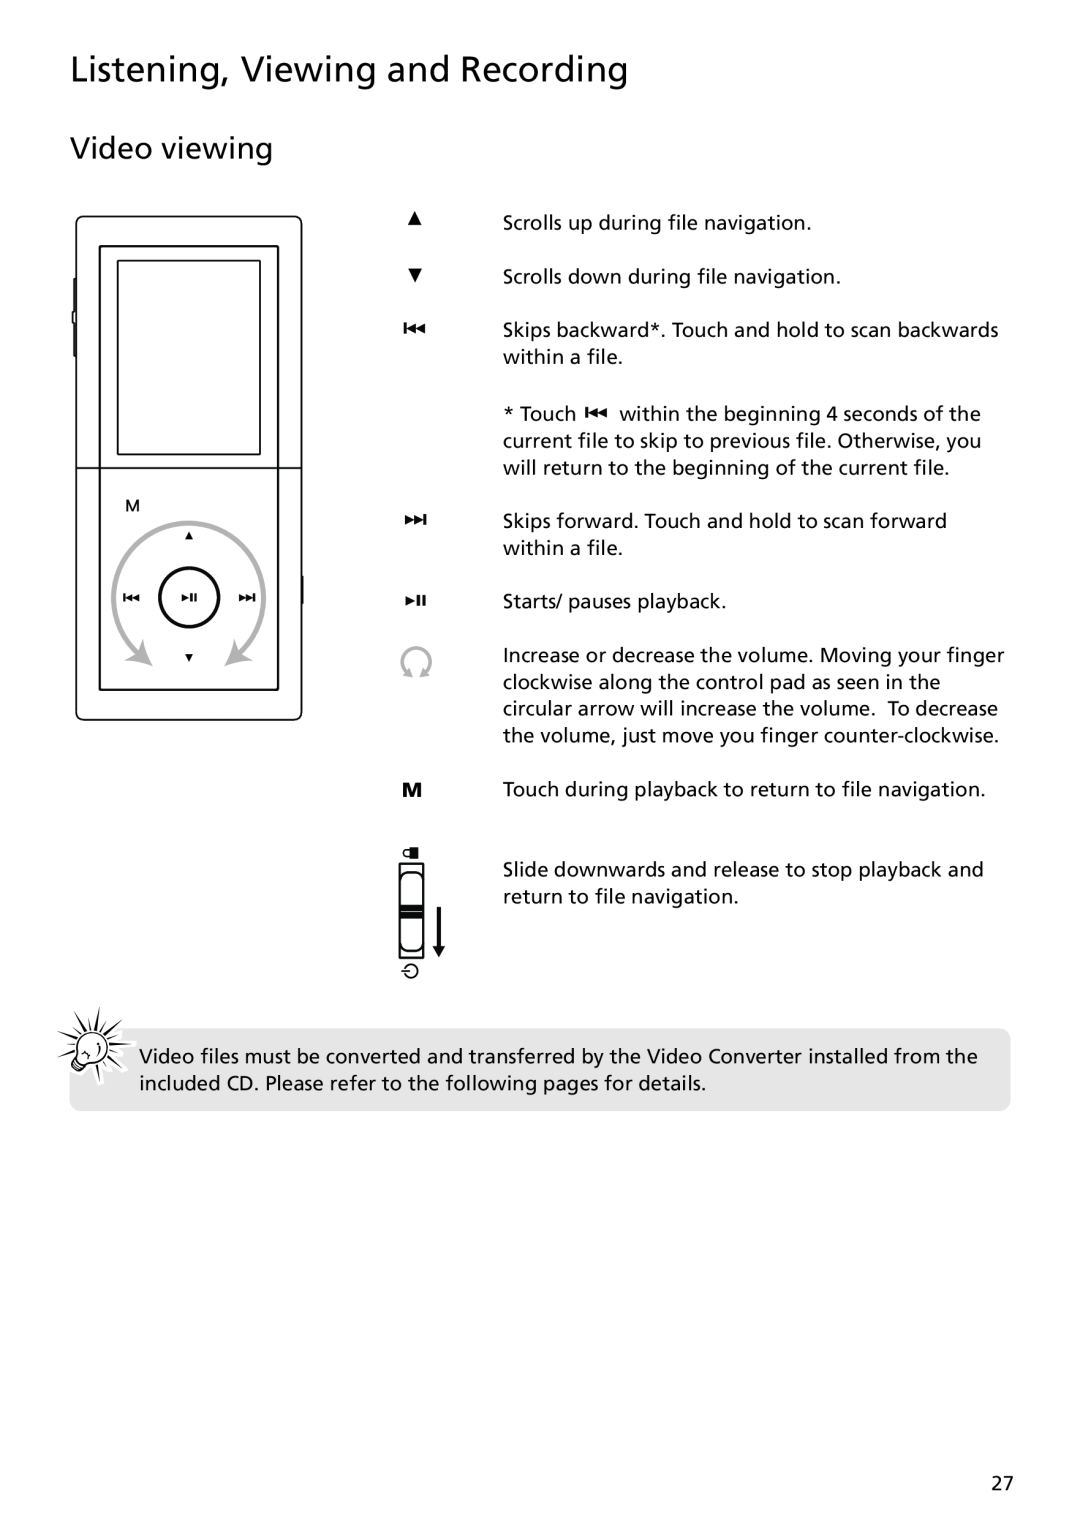 RCA MC5104 user manual Video viewing, Listening, Viewing and Recording 